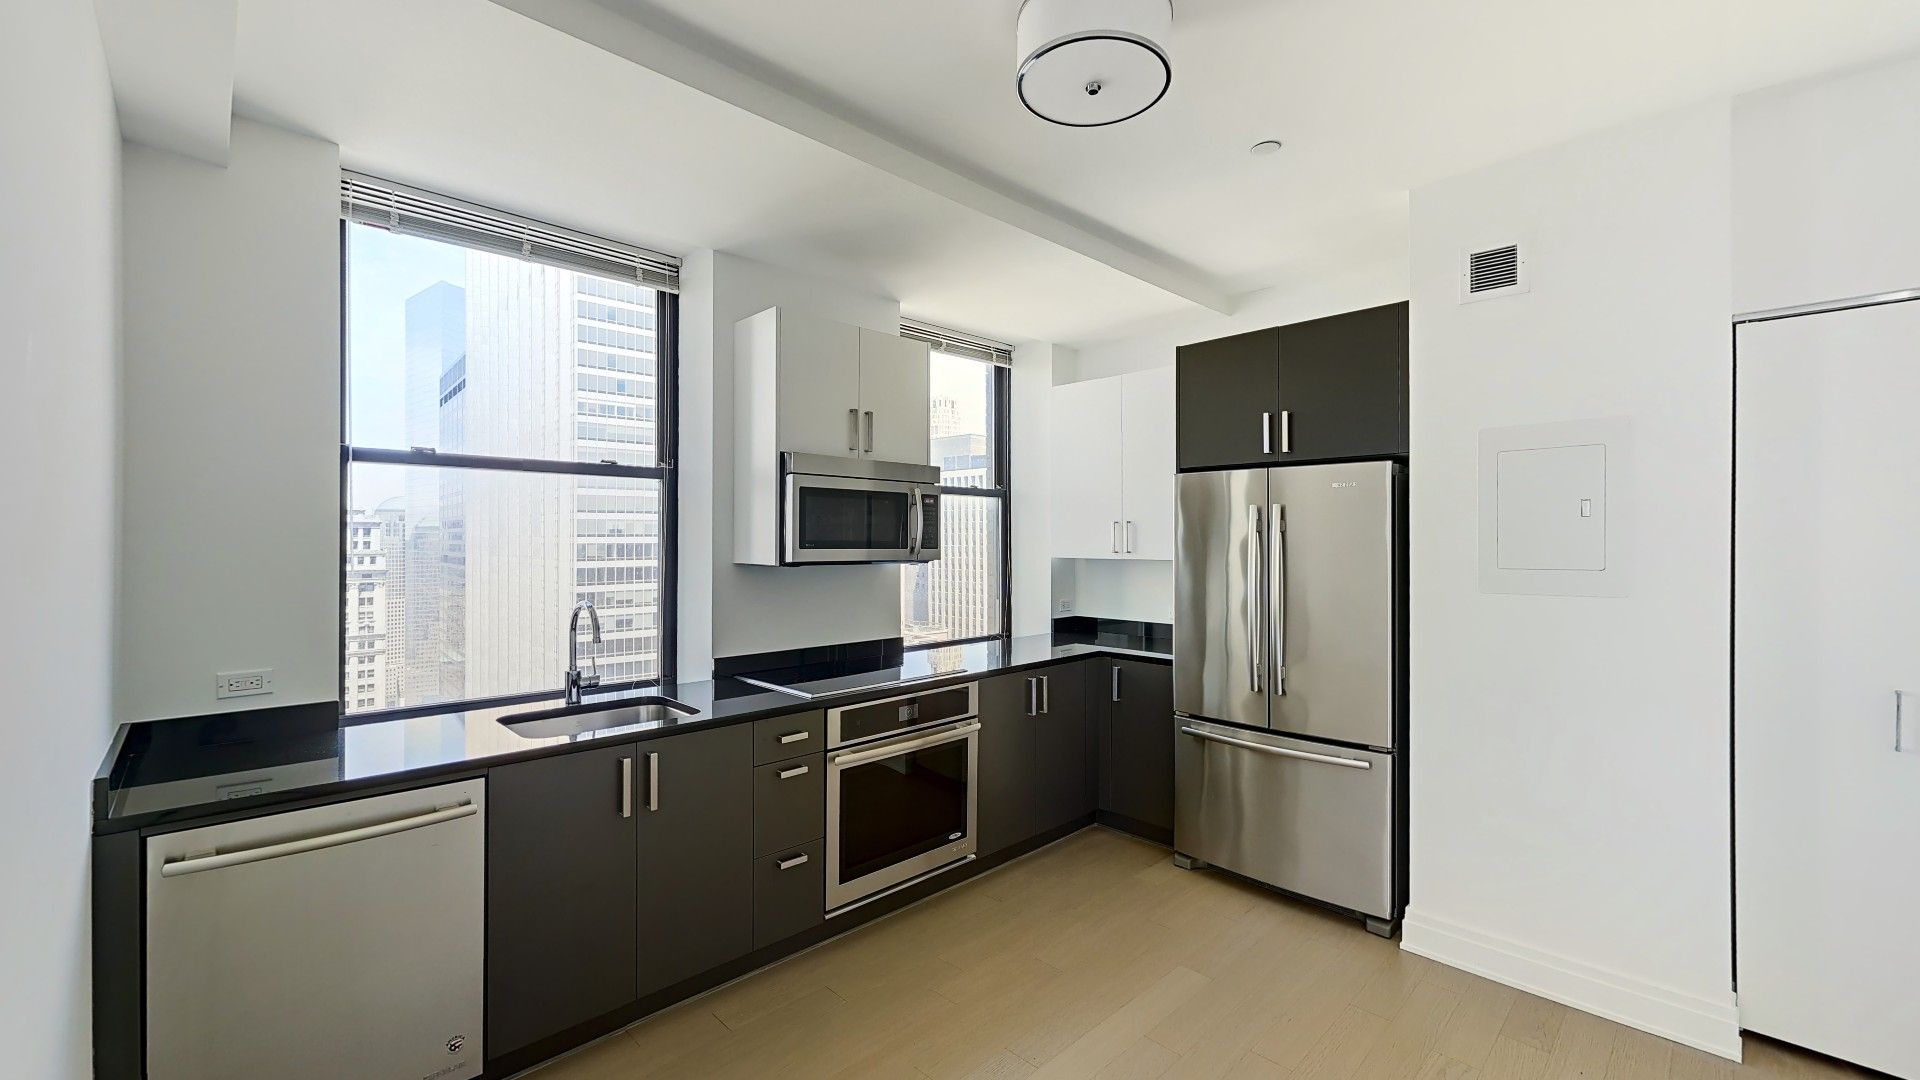 70 Pine Street 2609, Financial District, Downtown, NYC - 1 Bedrooms  
1 Bathrooms  
3 Rooms - 